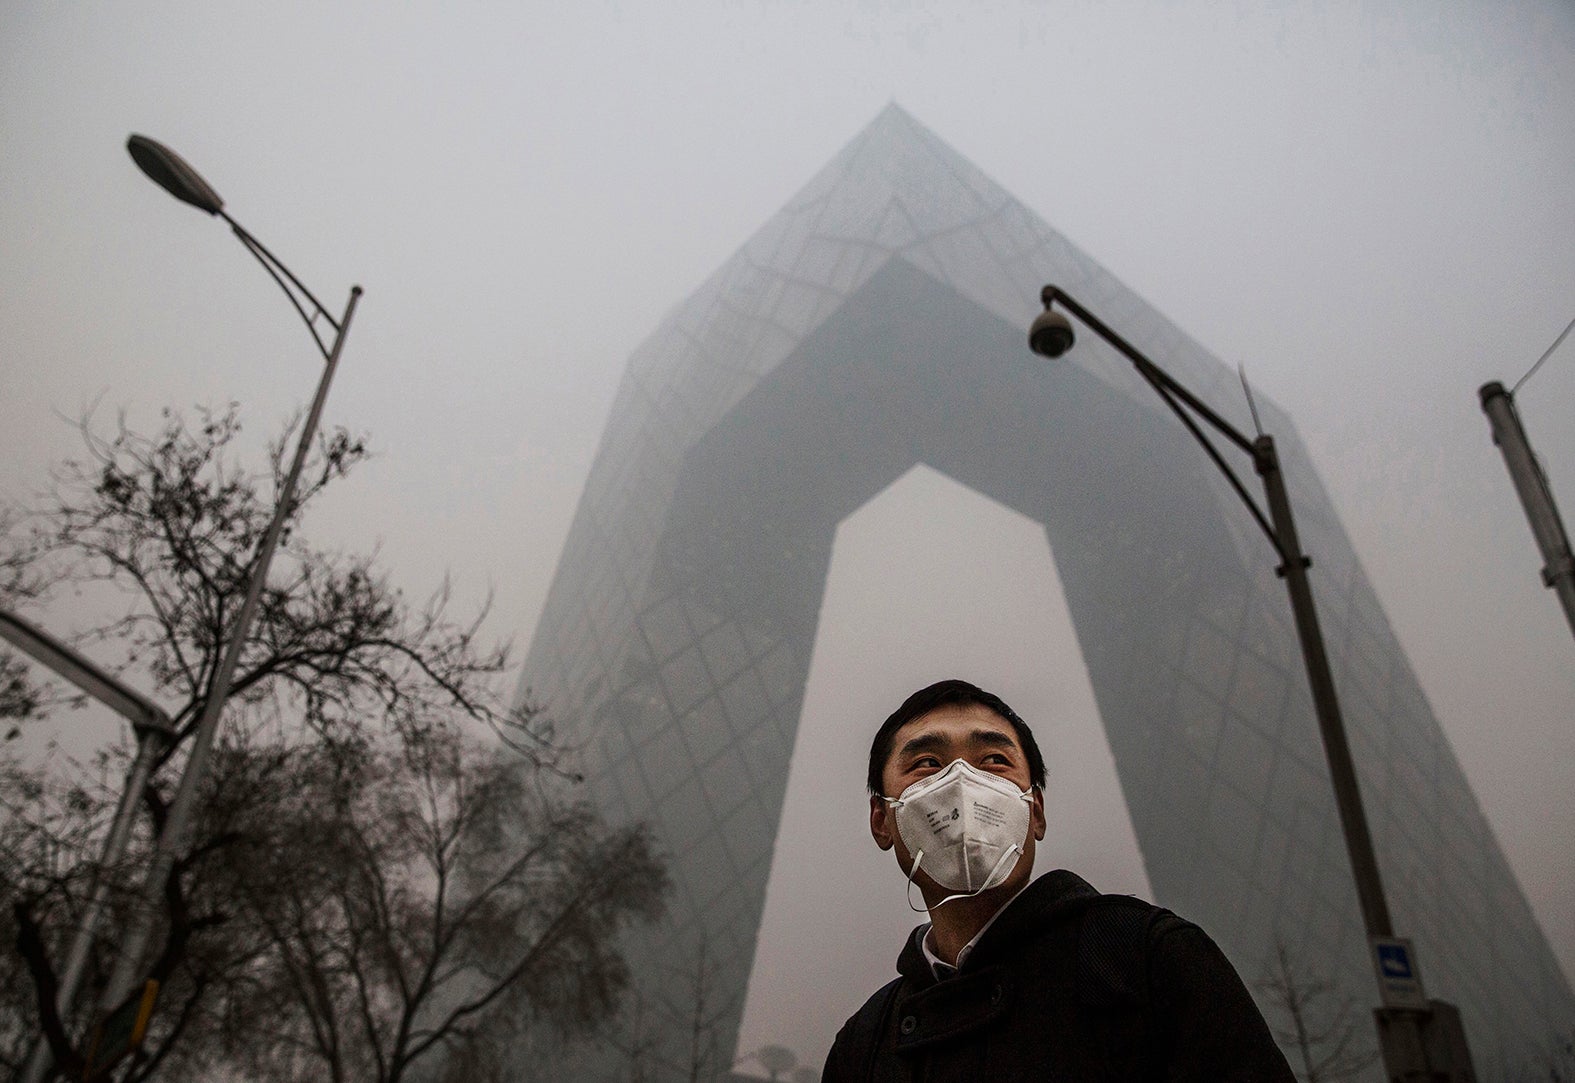 How Beijing took control of air pollution